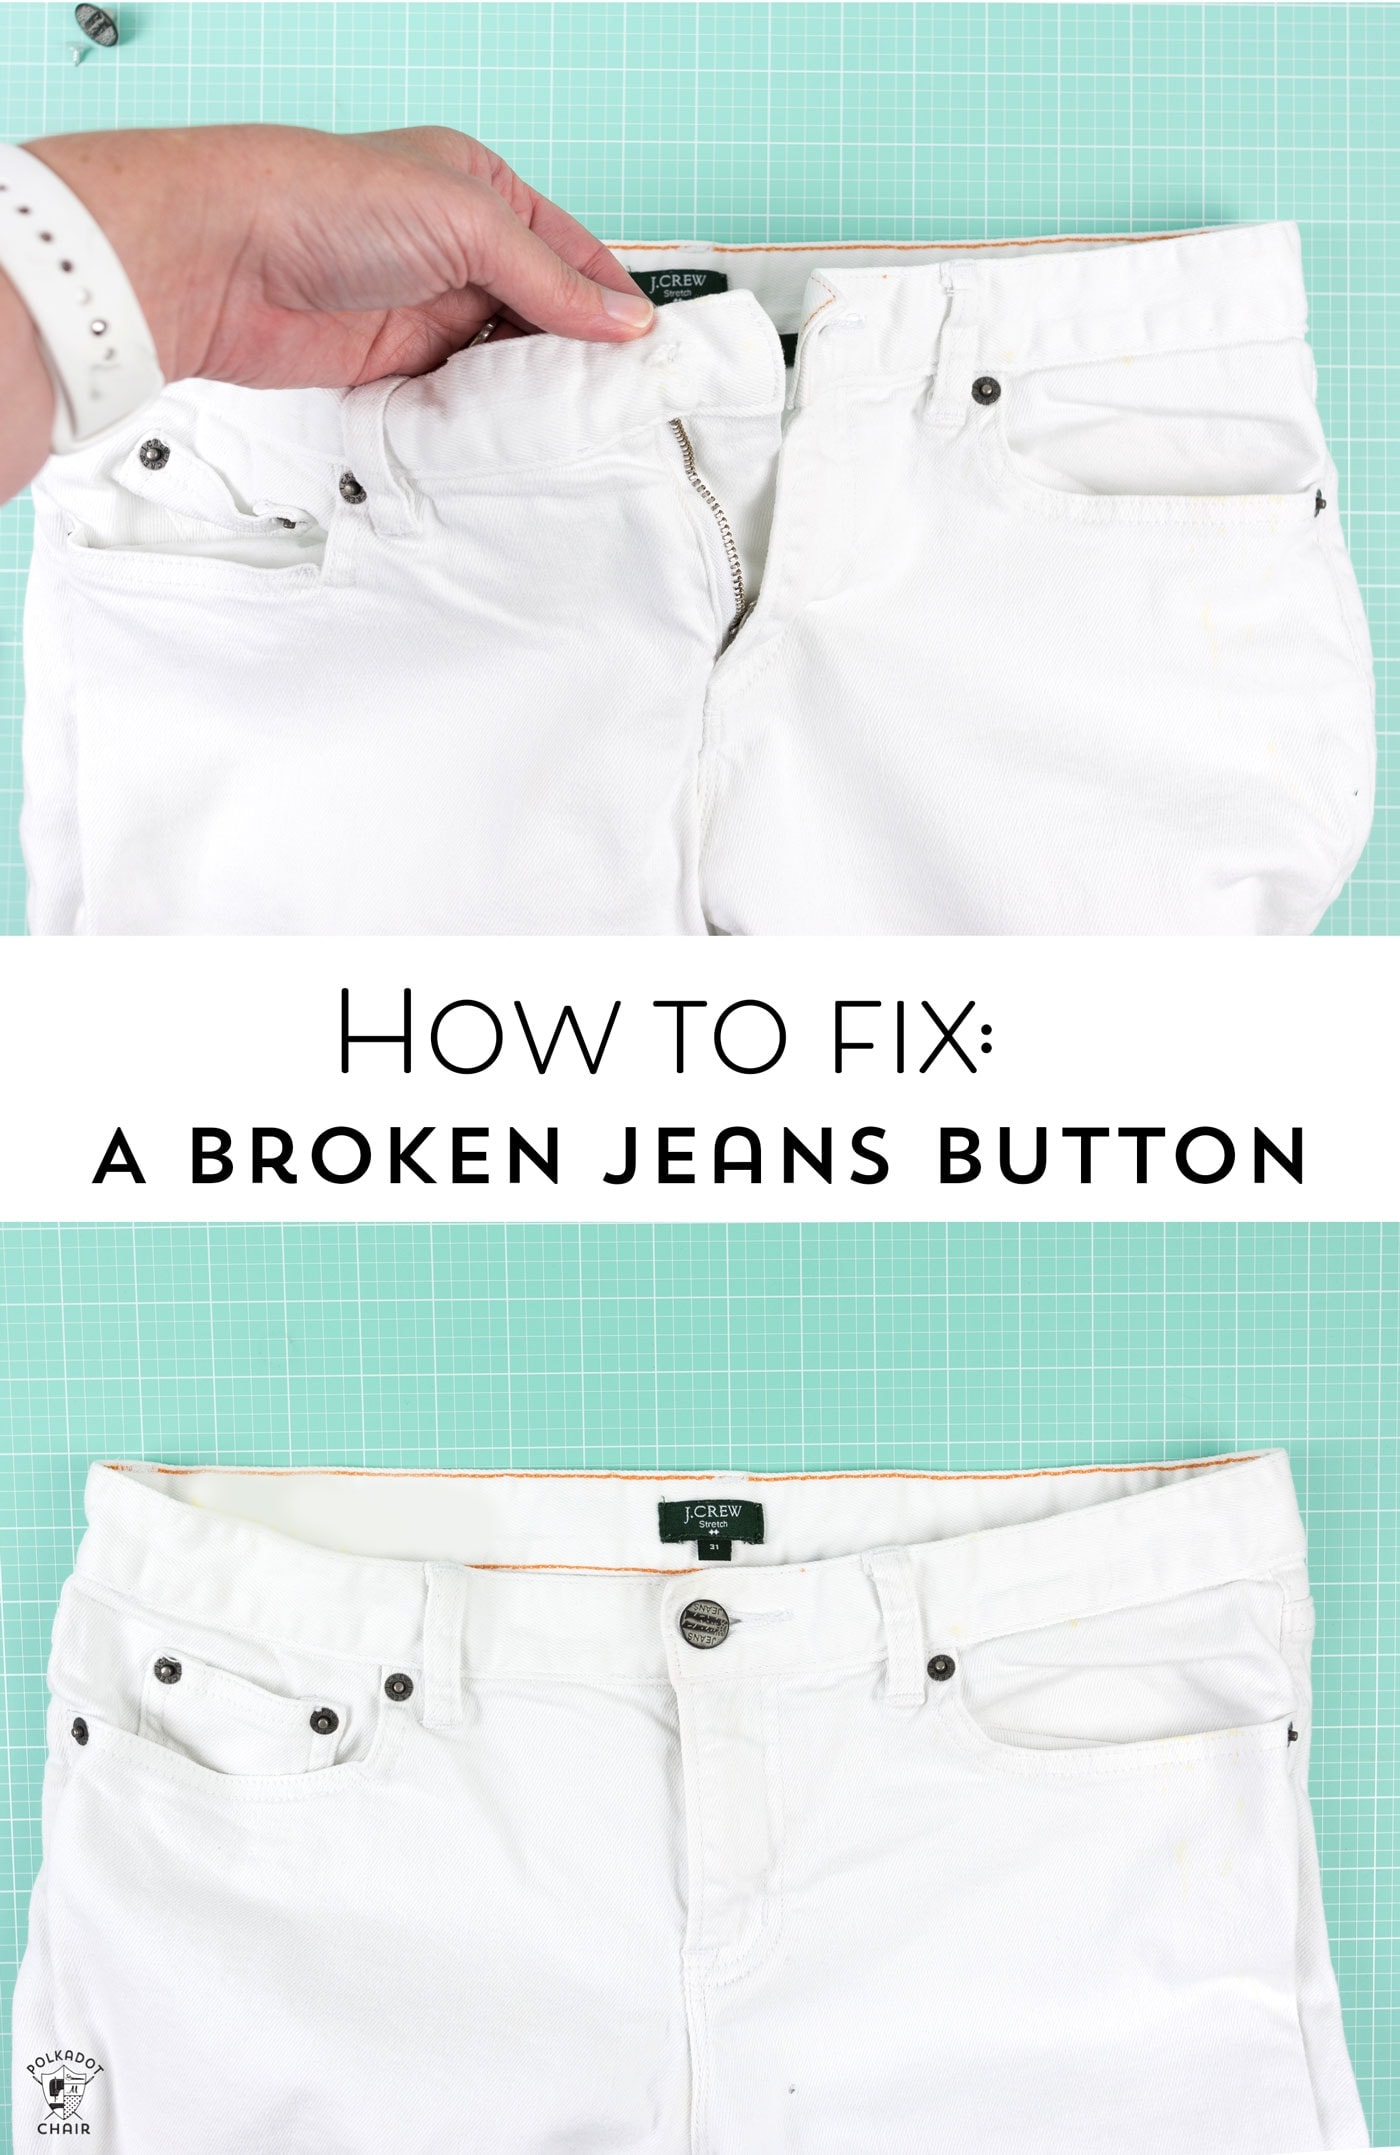 How To Fix A Broken Button On Jeans: Quick and Easy Solutions